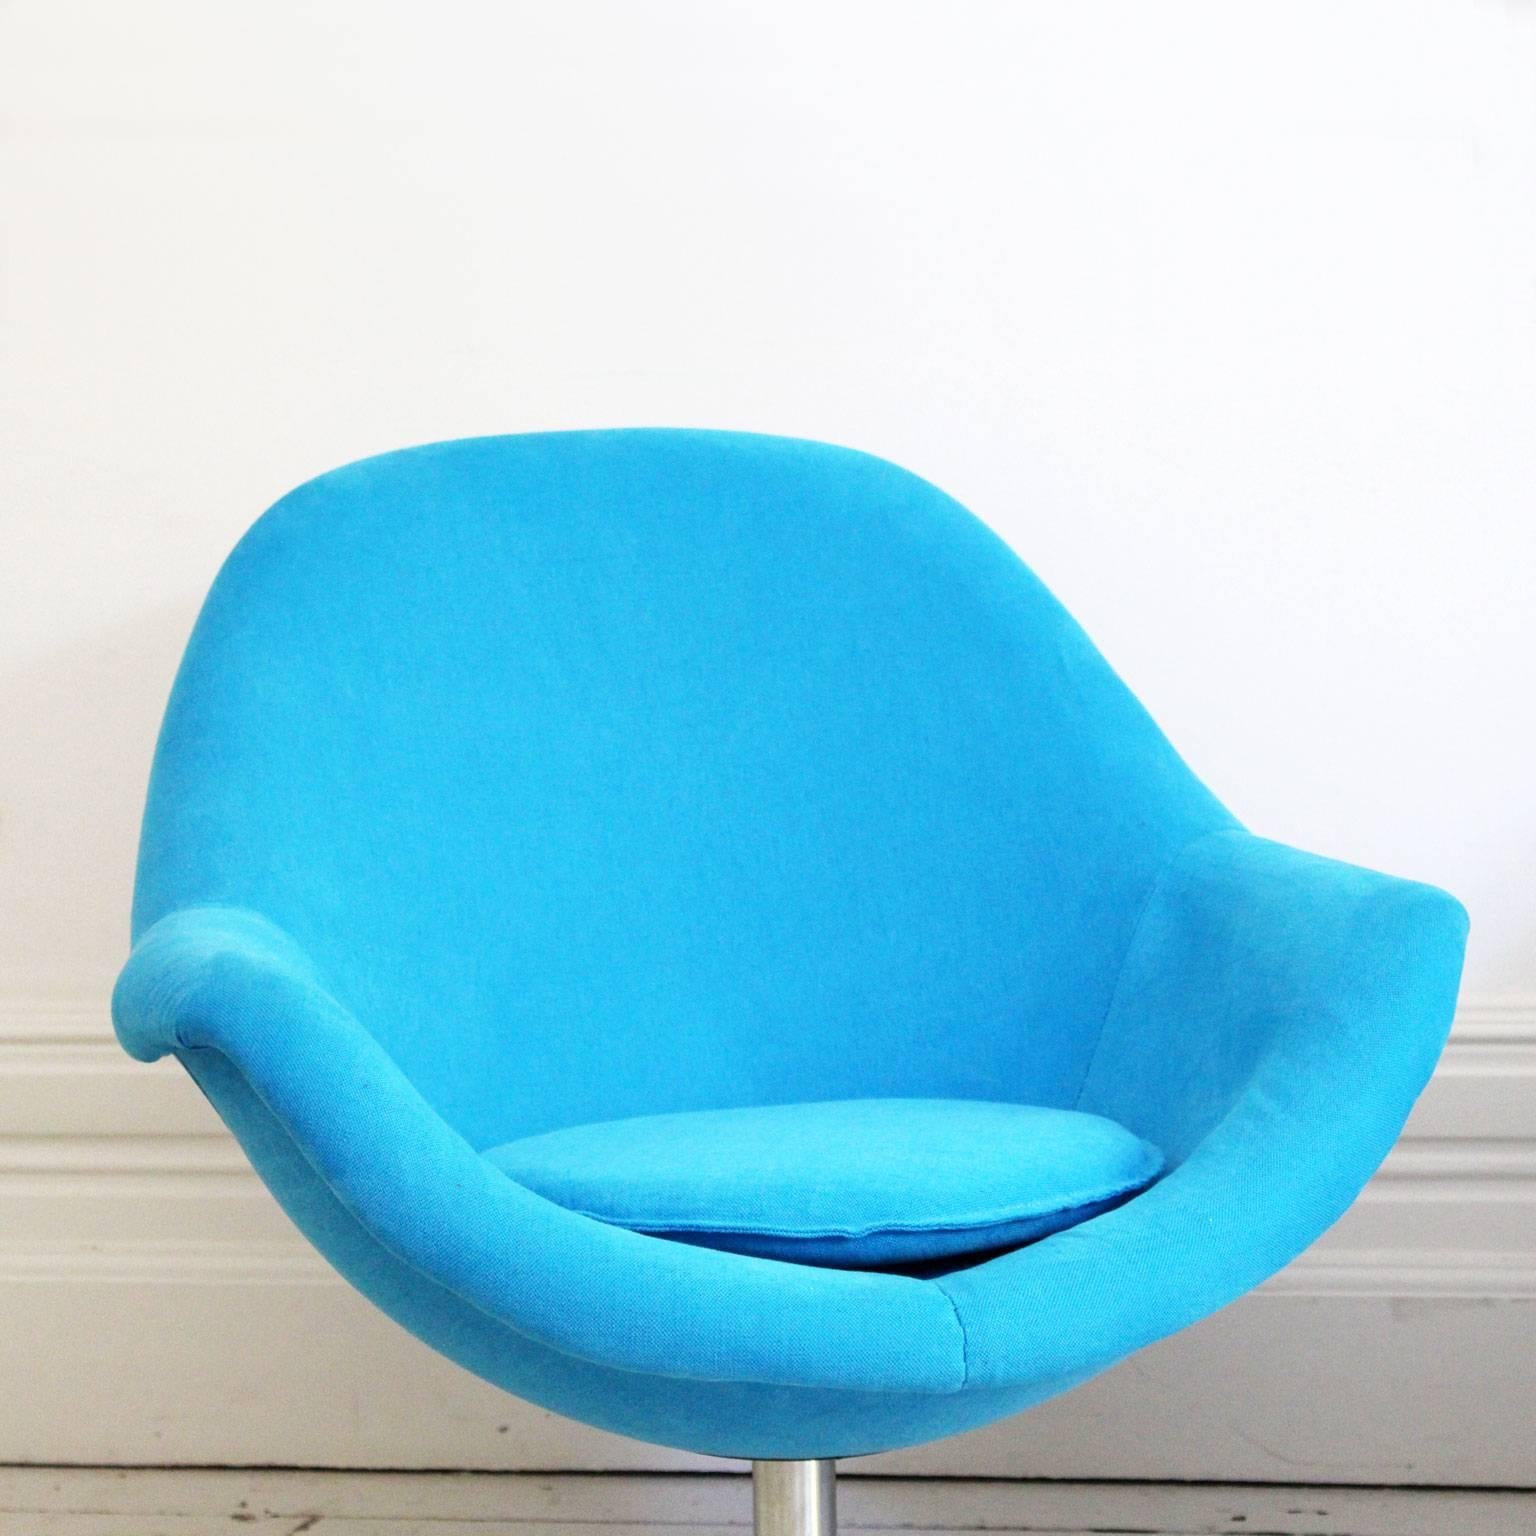 We have had this pair of 1960s egg chairs reupholstered in a Romo brushed turquoise fabric and we think they look fabulous. They're super comfortable and would look great pretty much anywhere.

Basic to the door shipping (generally by sea 8-10 weeks